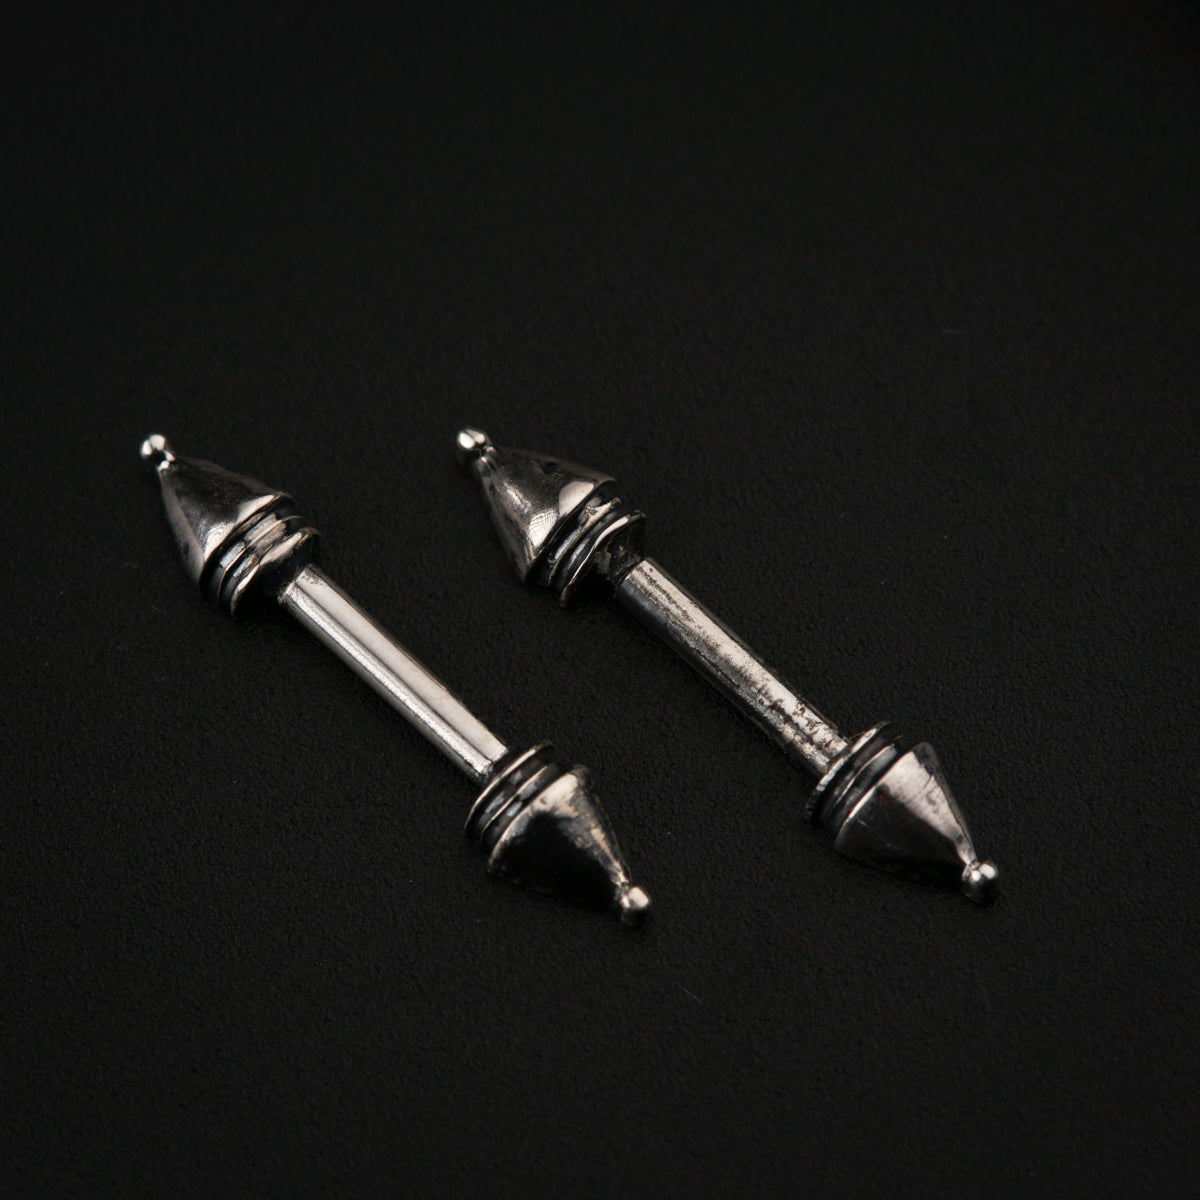 a pair of silver colored screws on a black background